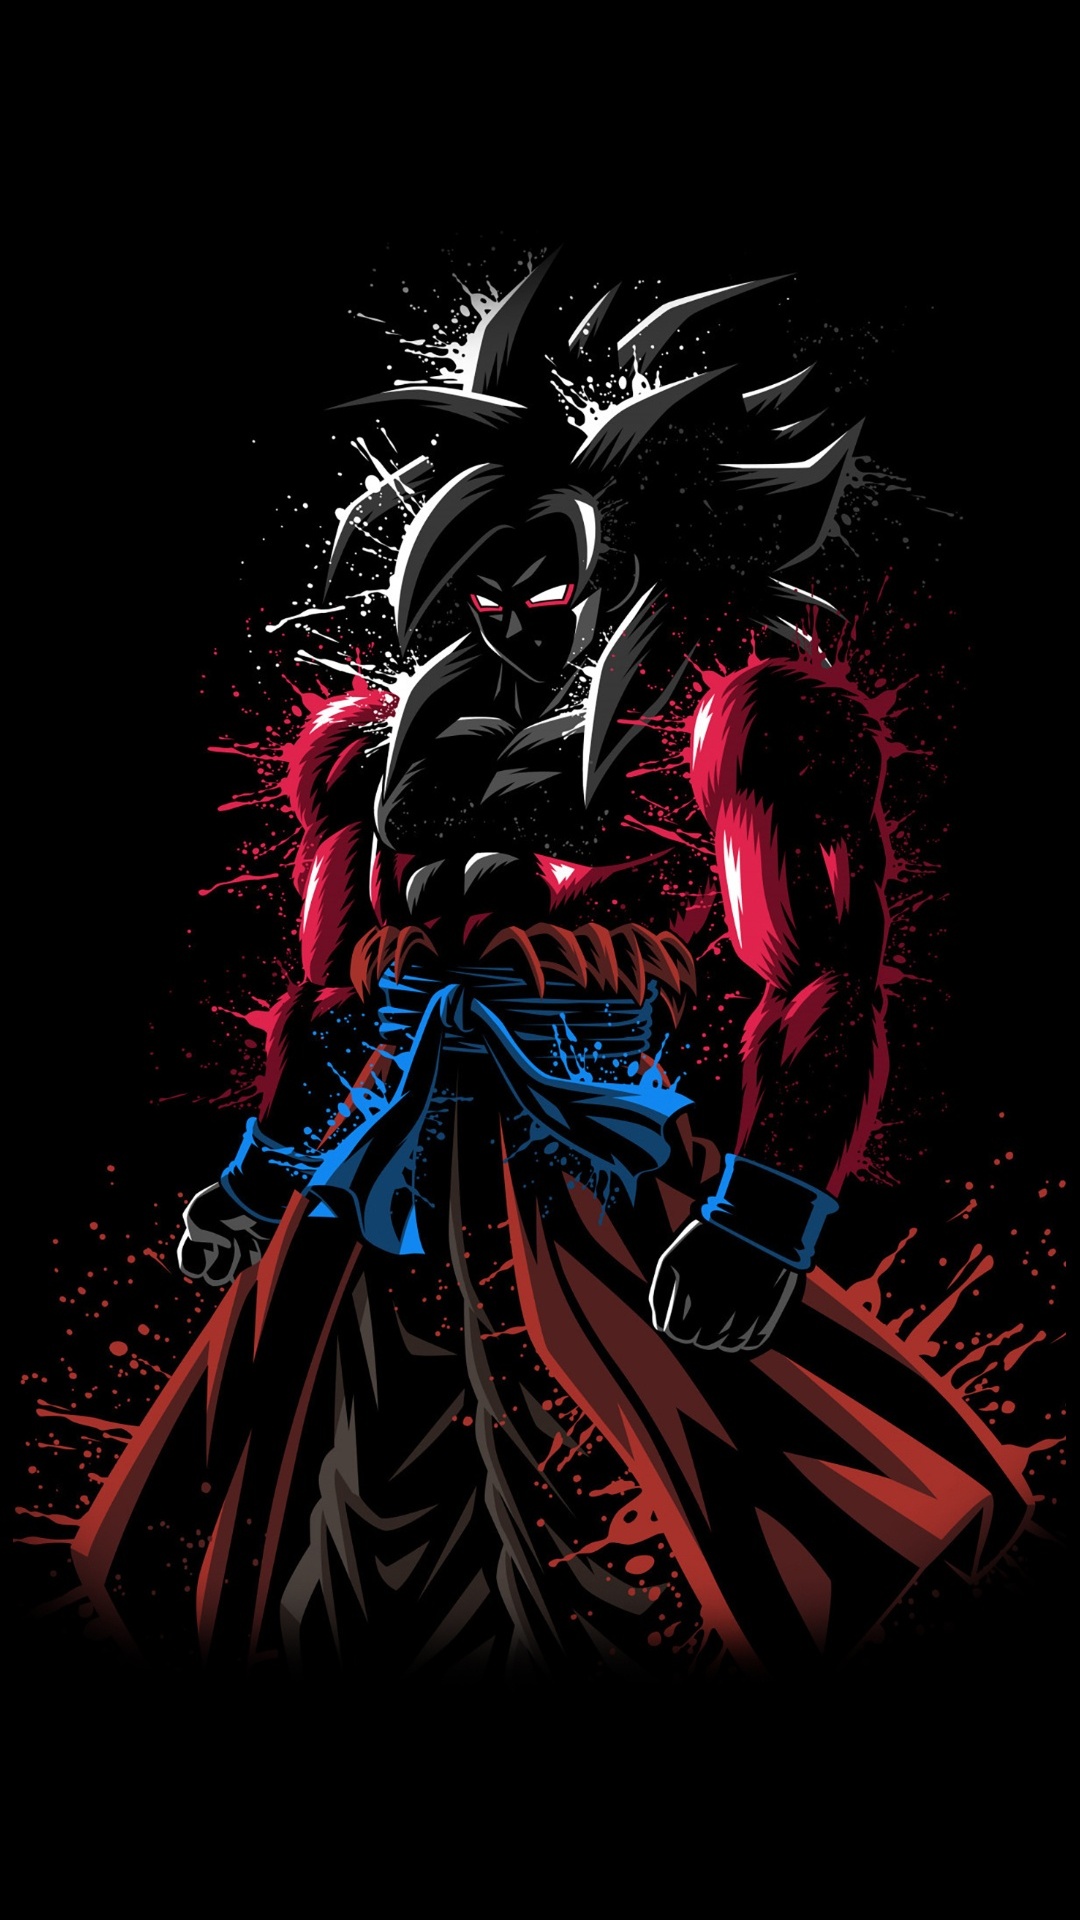 1080x1920 Vegeta Wallpapers for Android Mobile Smartphone [Full HD]